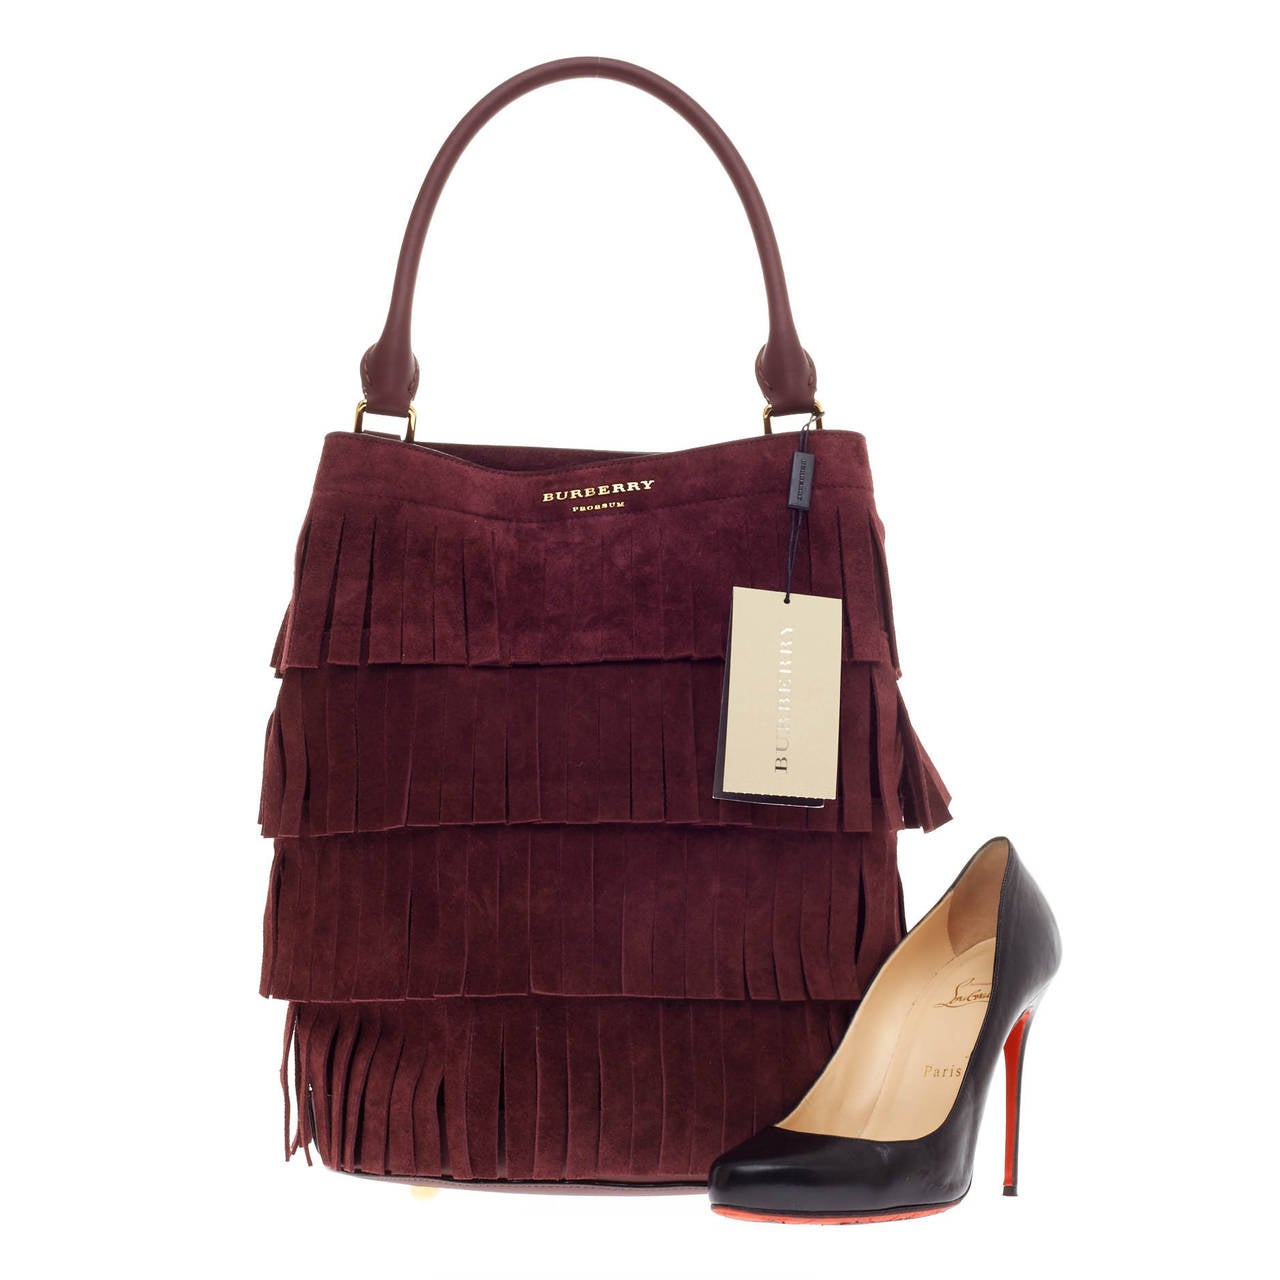 This authentic Burberry Tiered Fringe Bucket Bag Suede is chic design with 70's inspired flair which can be worn fashionably. Crafted in soft maroon suede in a tiered fringe design, this bucket bag features a single looped leather handle, sturdy